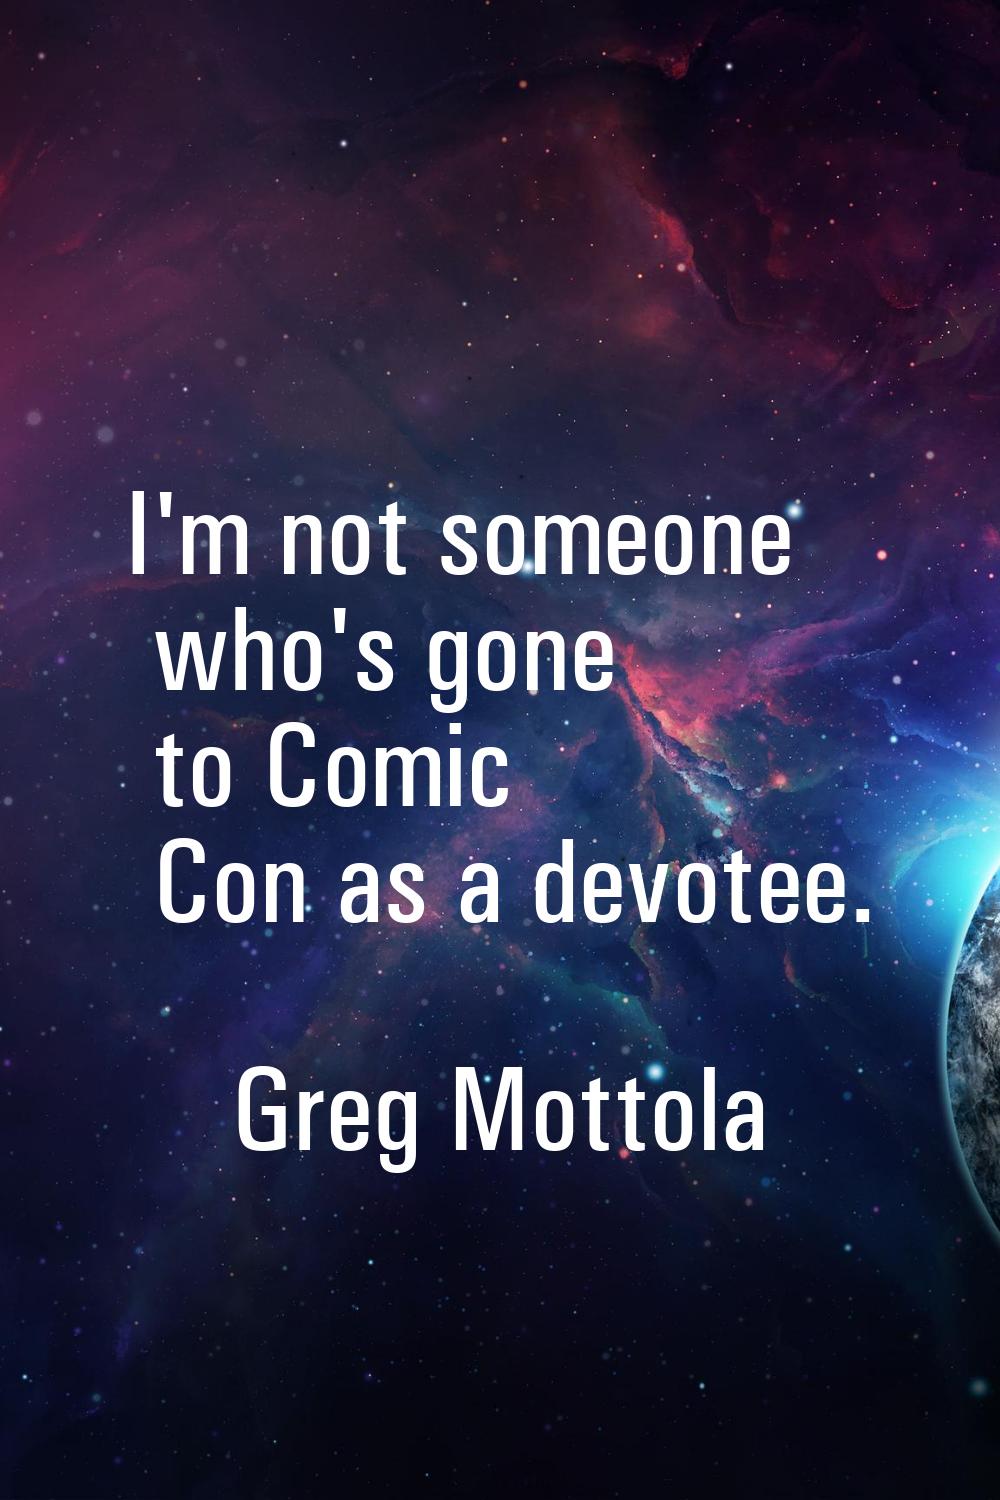 I'm not someone who's gone to Comic Con as a devotee.